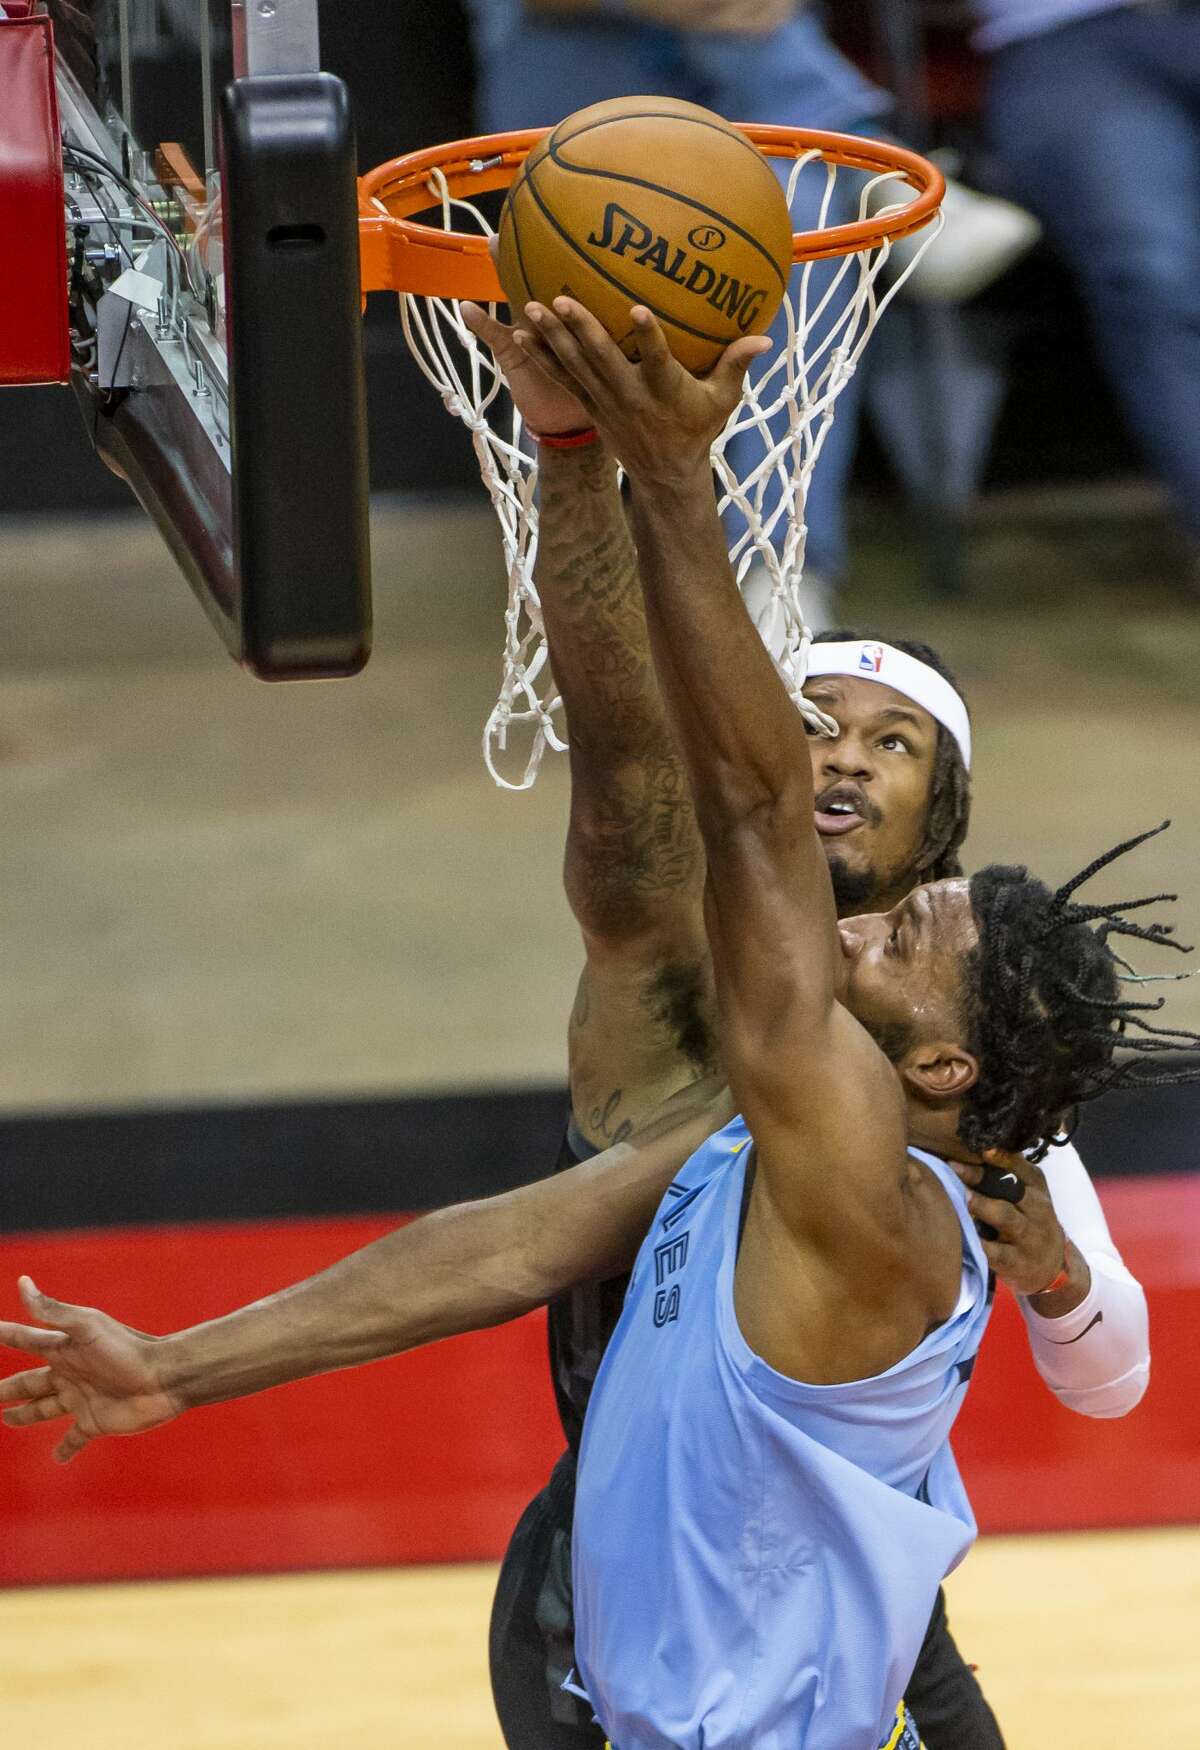 Houston Rockets guard Ben McLemore (16) tries to block a shot by Memphis Grizzlies forward Justise Winslow (7) during the third quarter of an NBA basketball game between the Houston Rockets and Memphis Grizzlies on Sunday, Feb. 28, 2021, at Toyota Center in Houston.